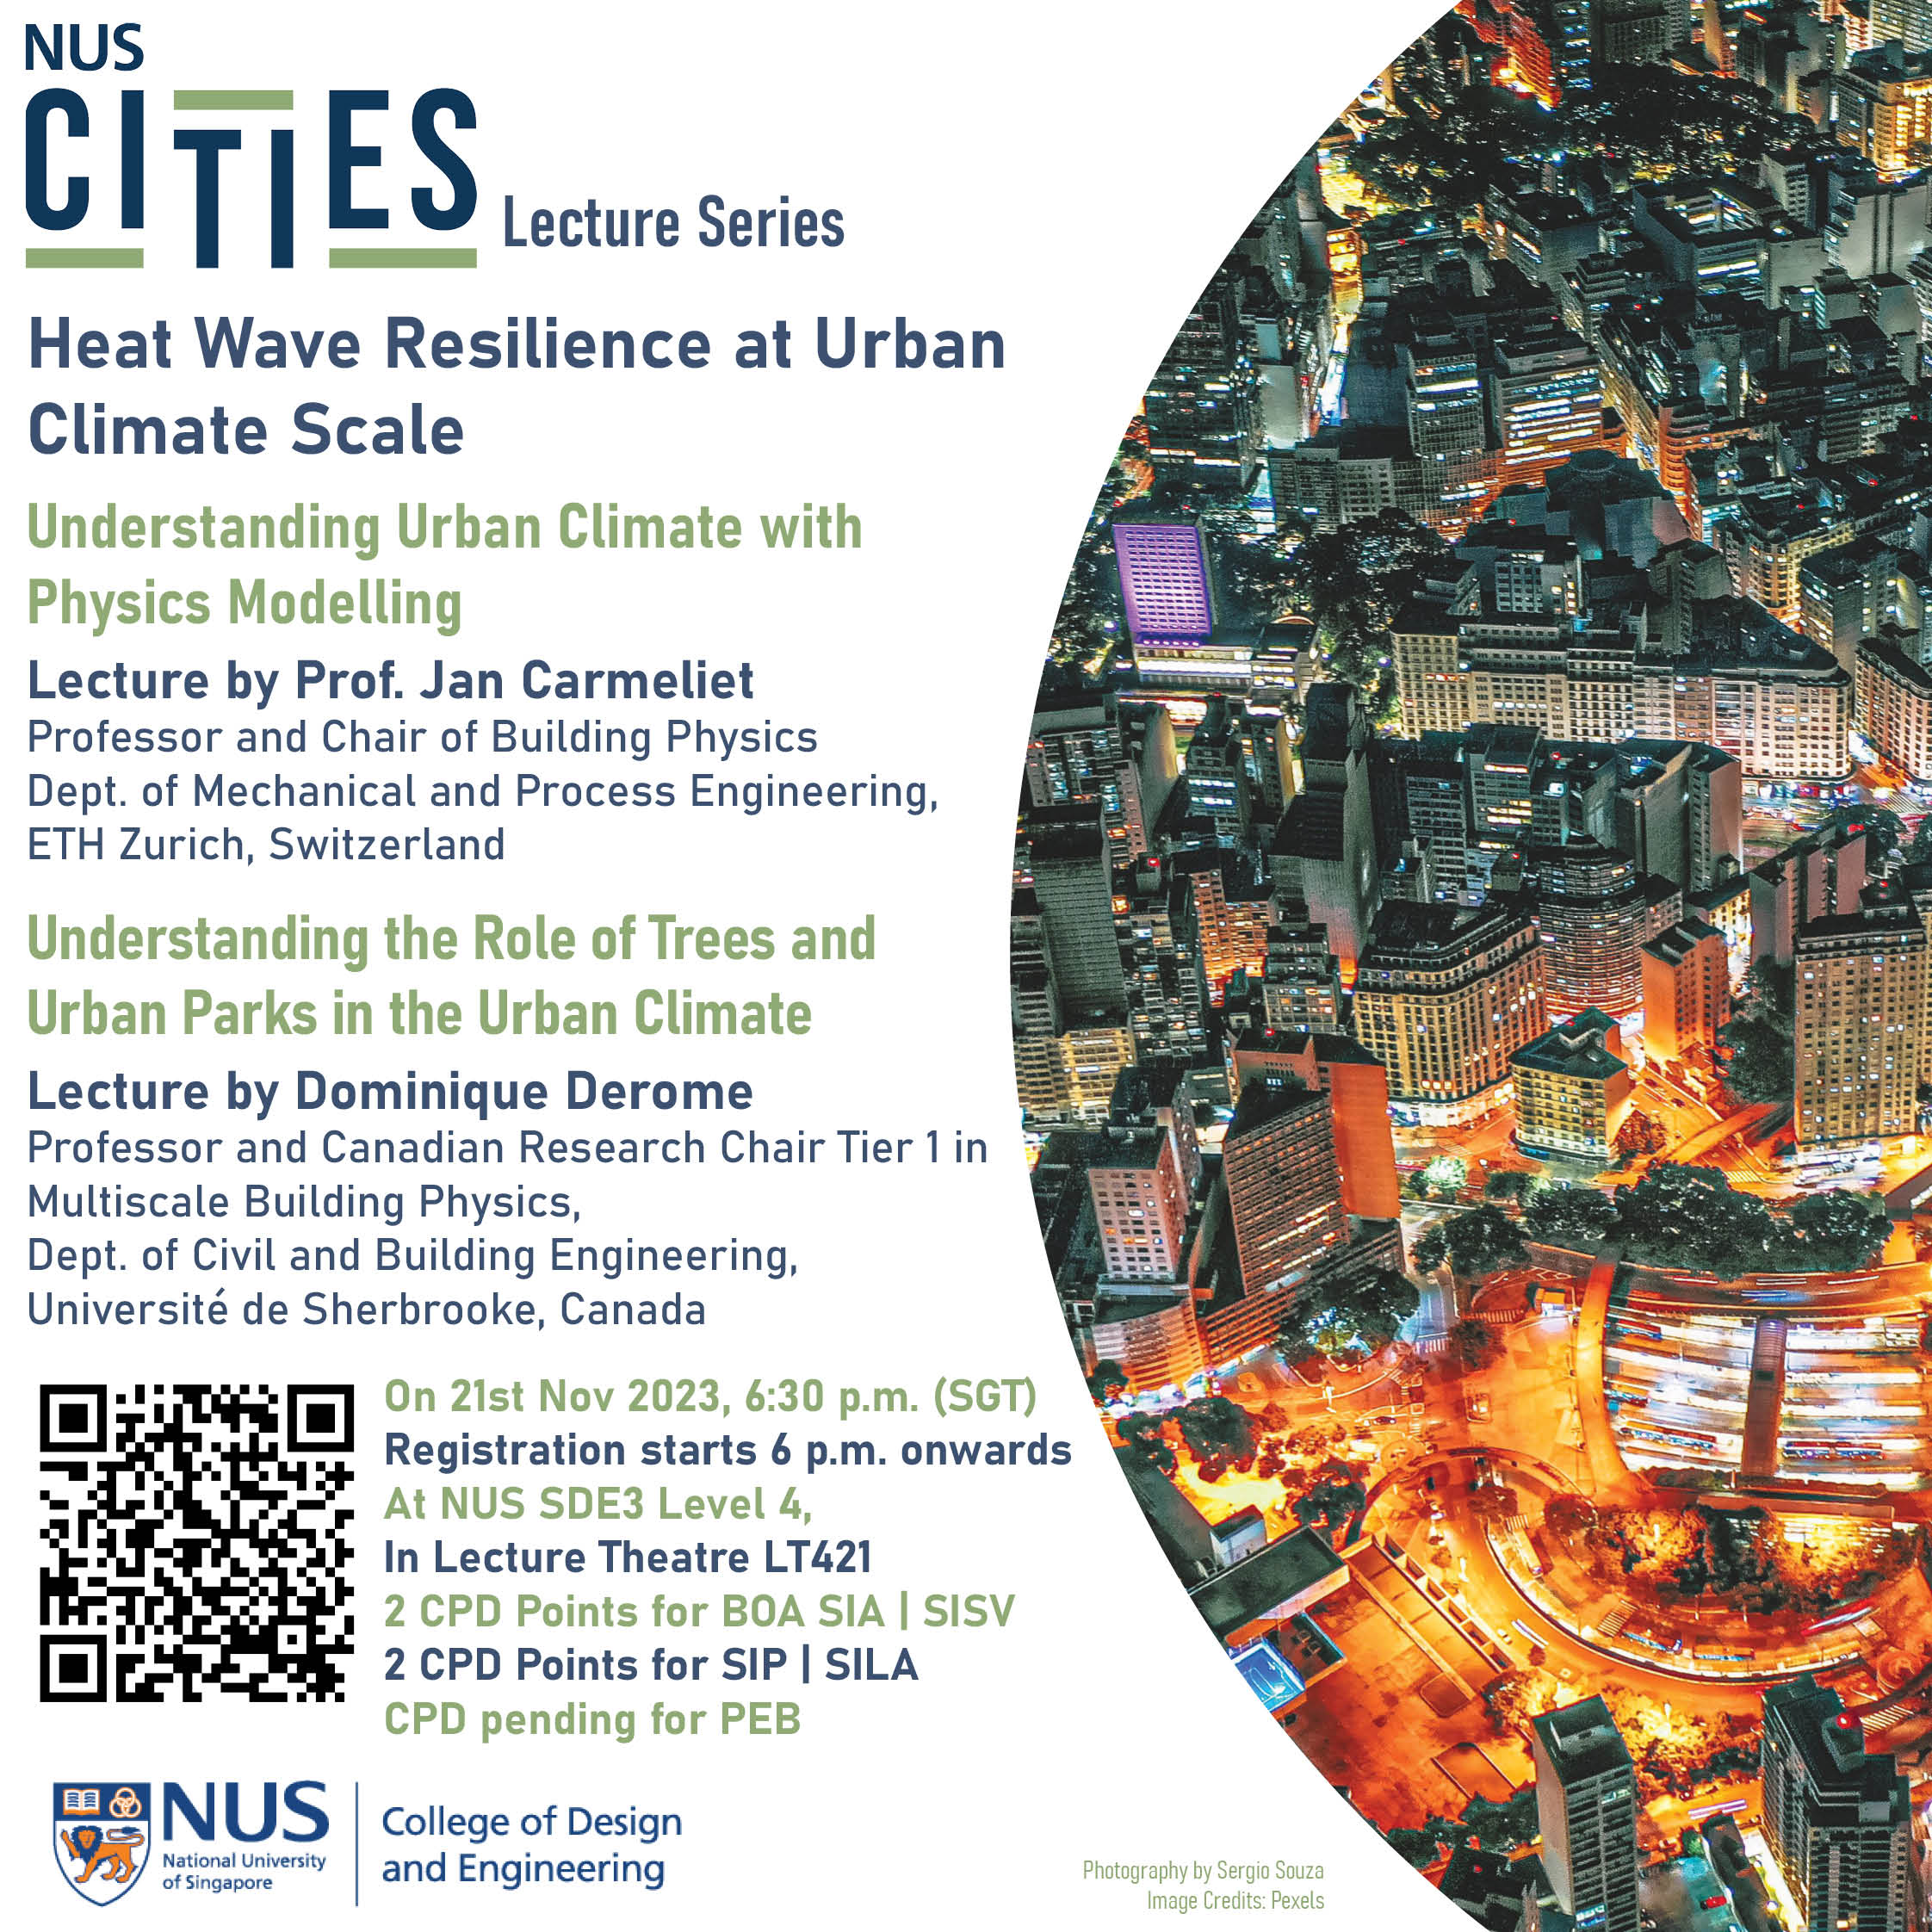 NUS Cities Lecture Series 7: Heat Wave Resilience at Urban Climate Scale